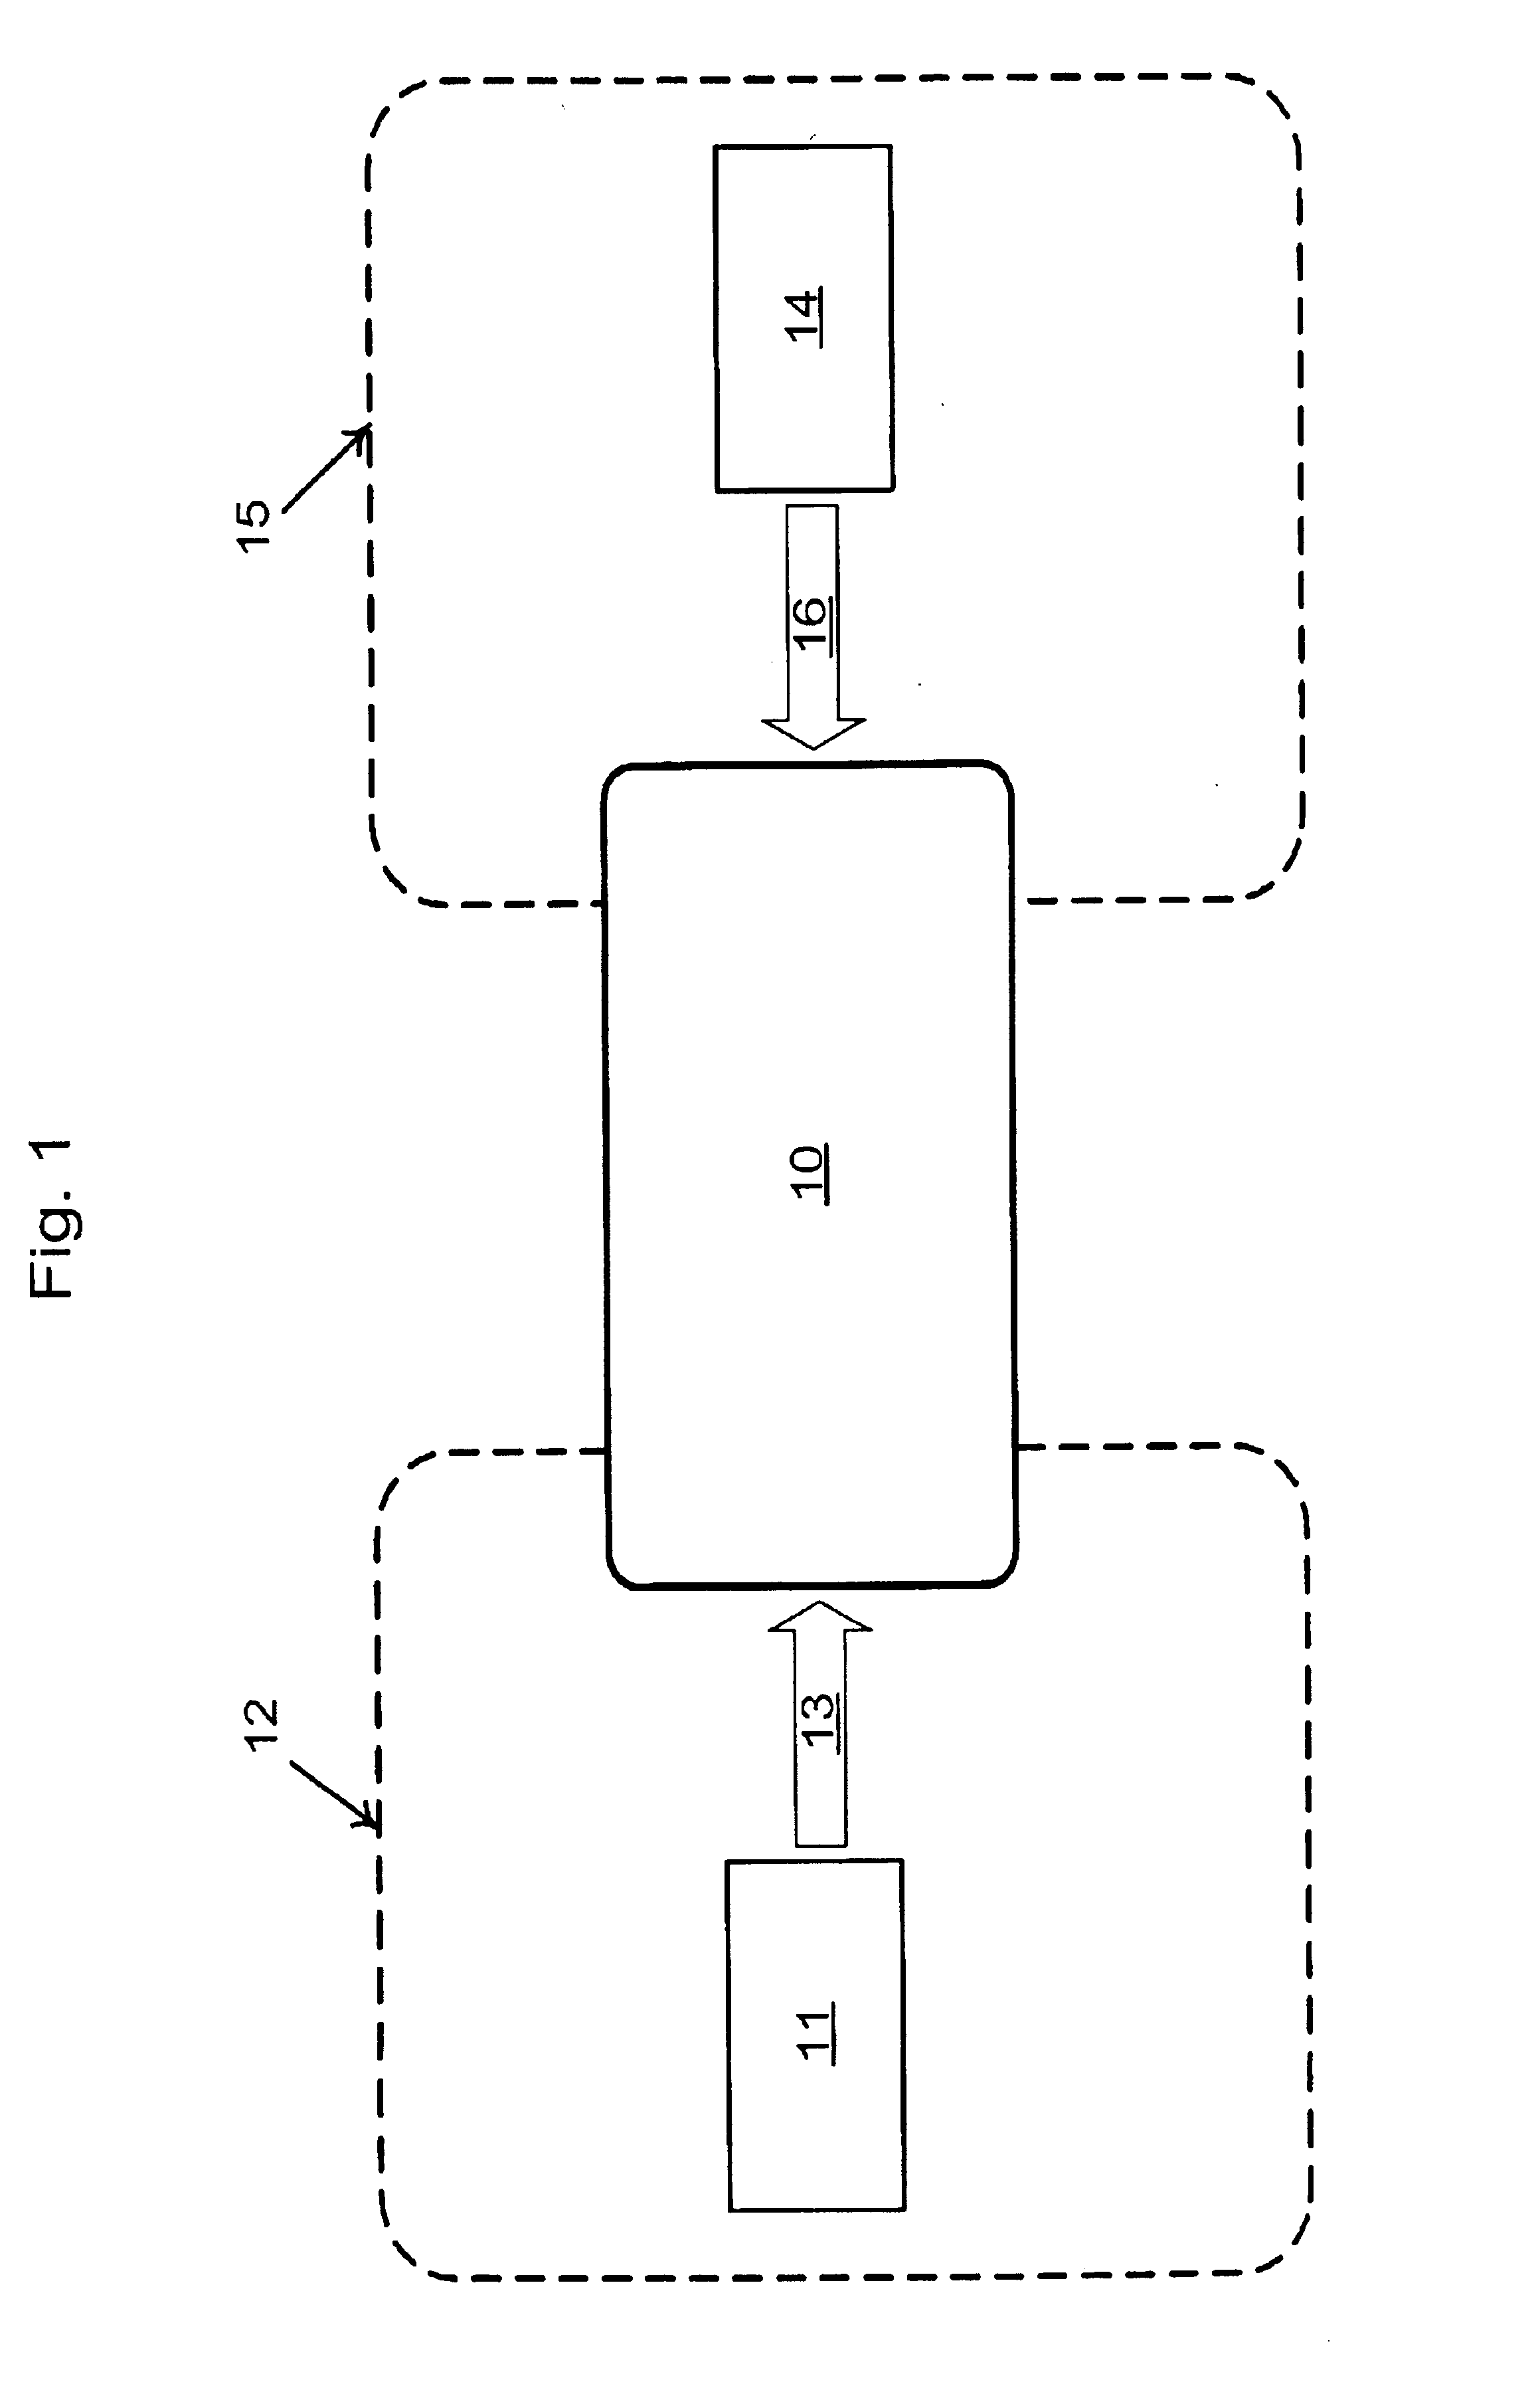 Methods of adjusting the Wobbe Index of a fuel and compositions thereof